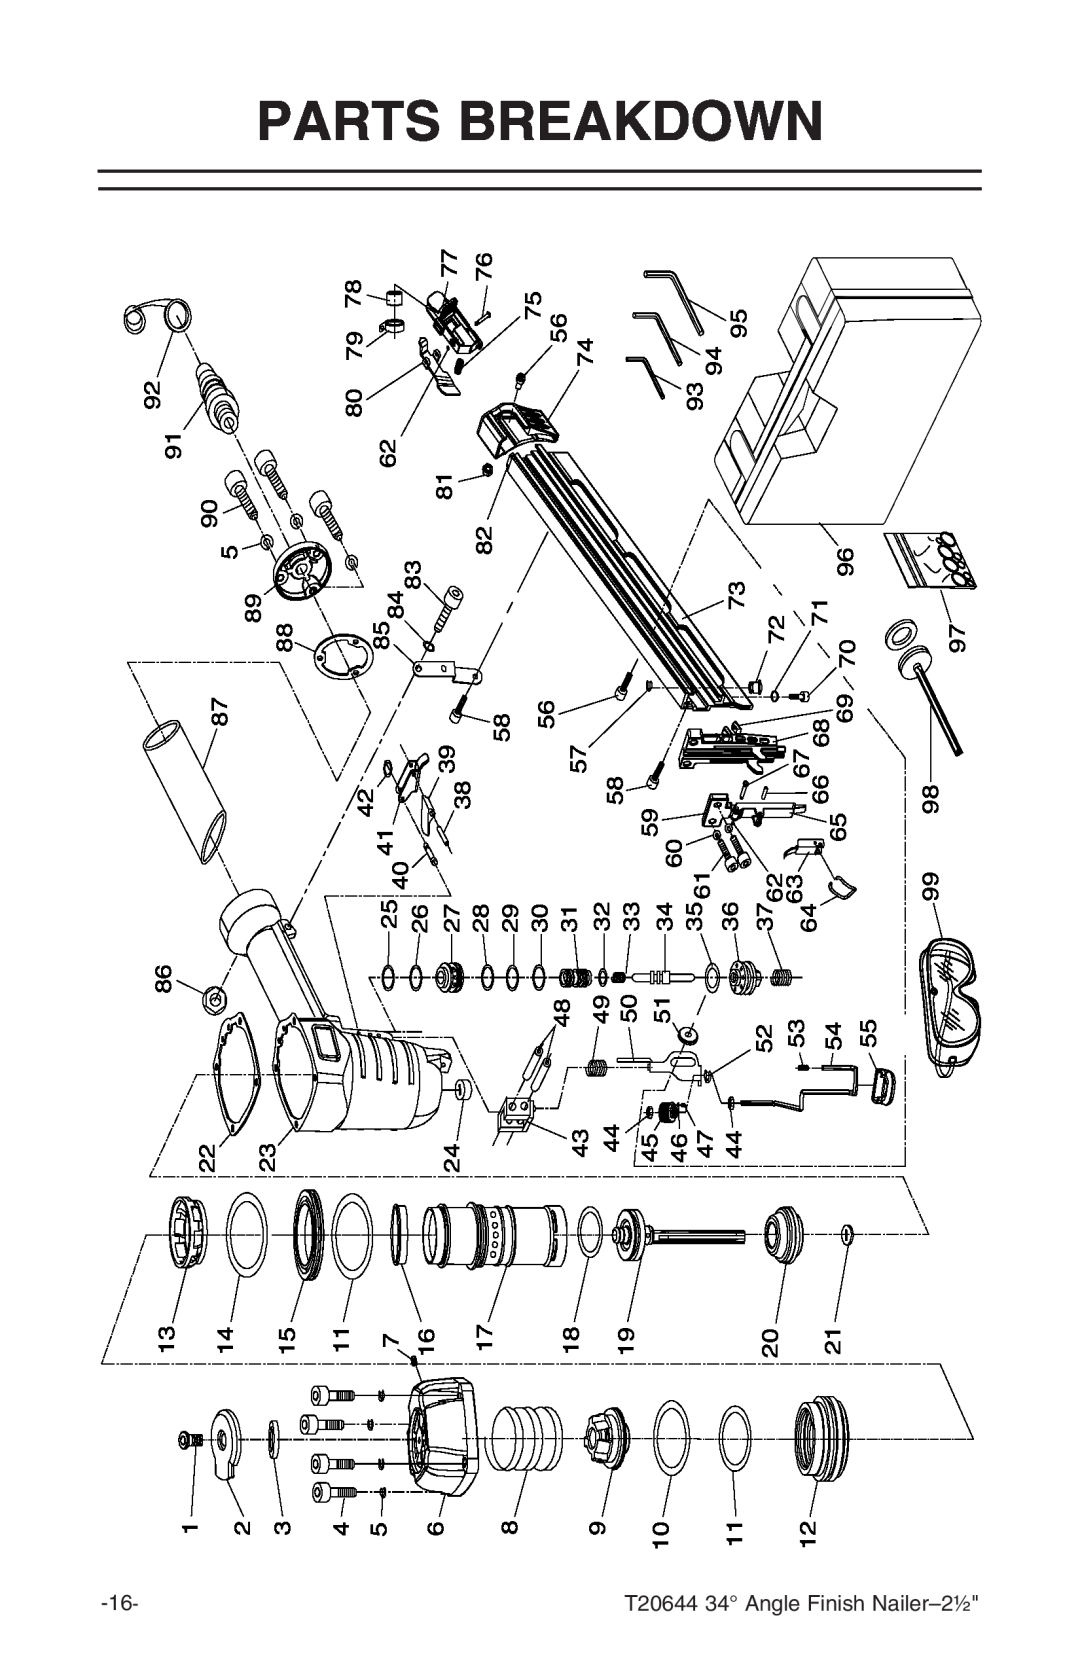 Grizzly instruction manual Parts Breakdown, T20644 34 Angle Finish, Nailer-2½ 